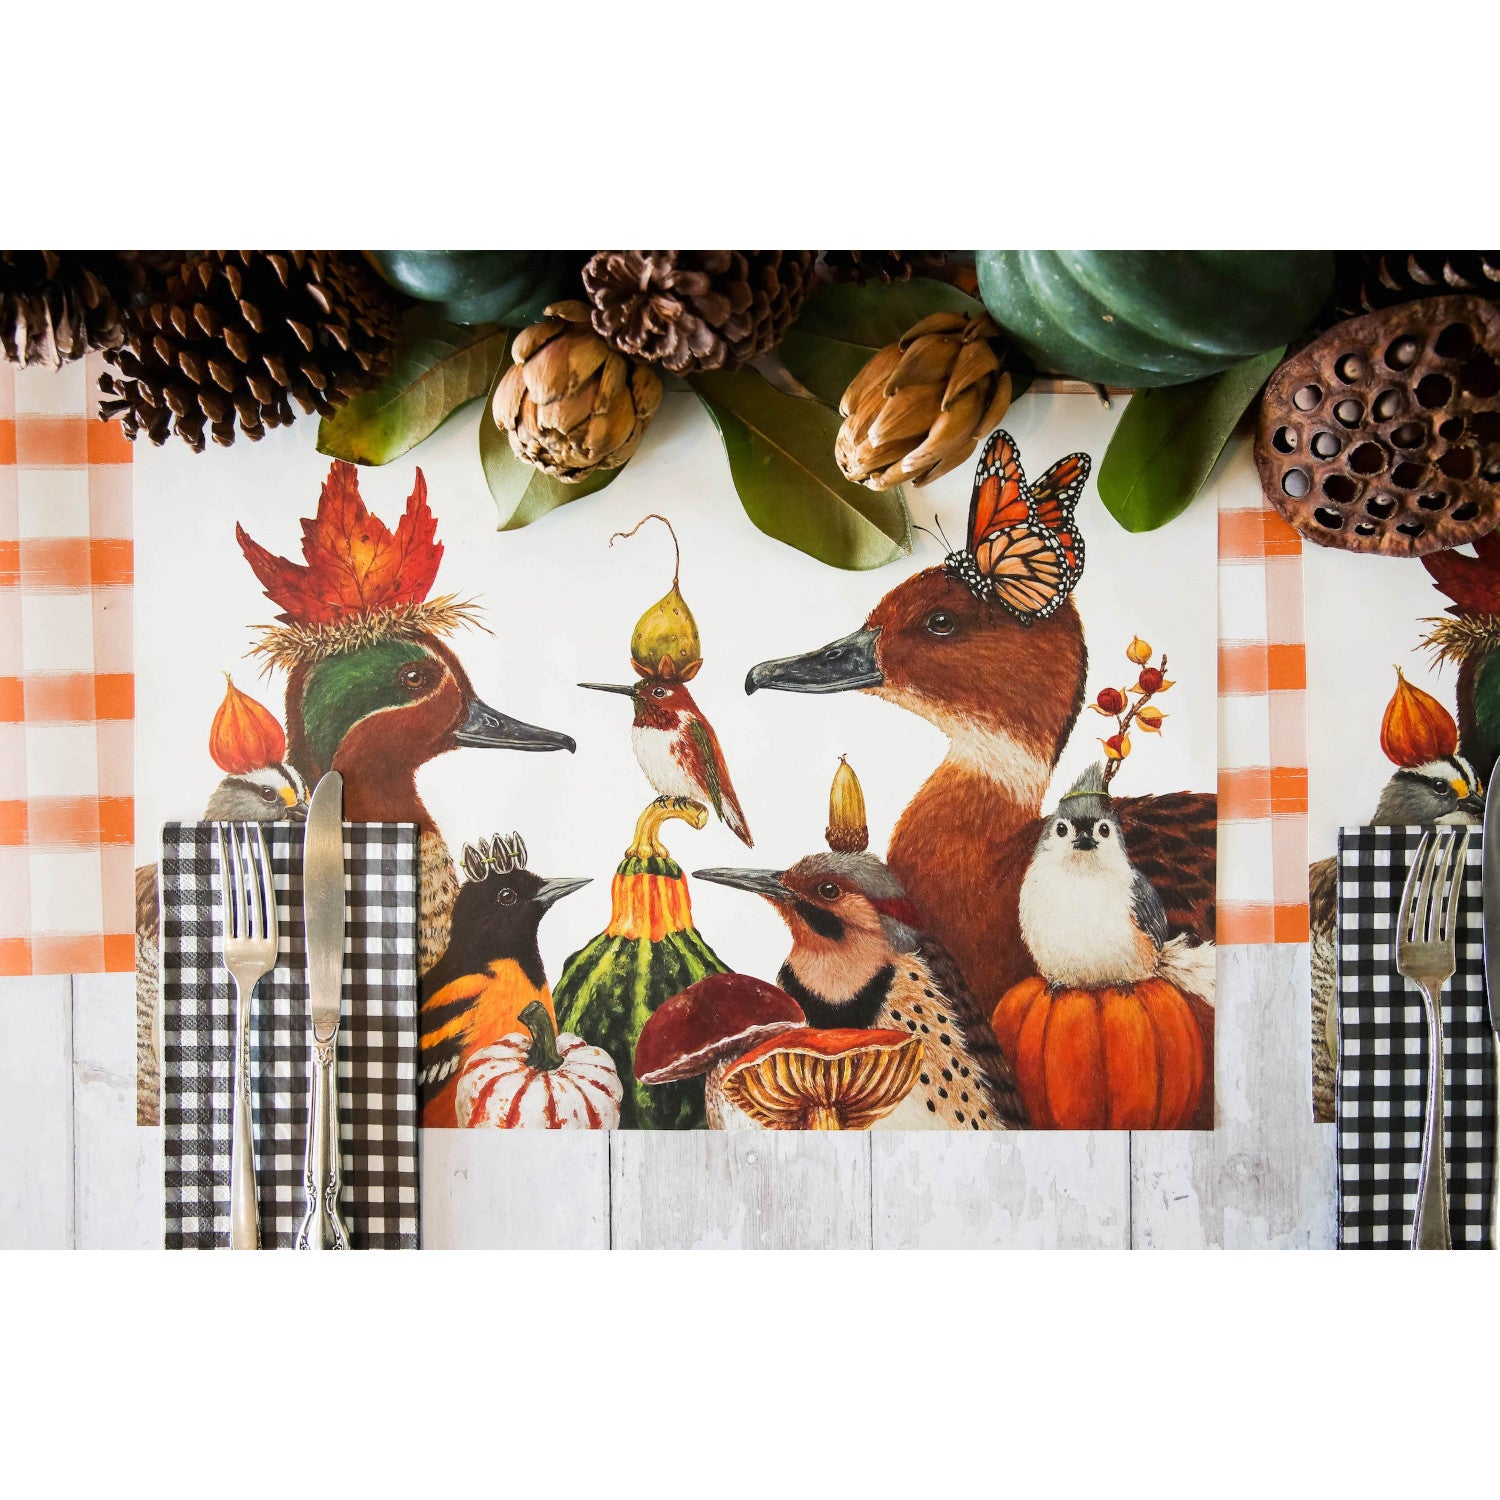 The We Gather Together Placemat under an elegant fall-themed table setting, from above.